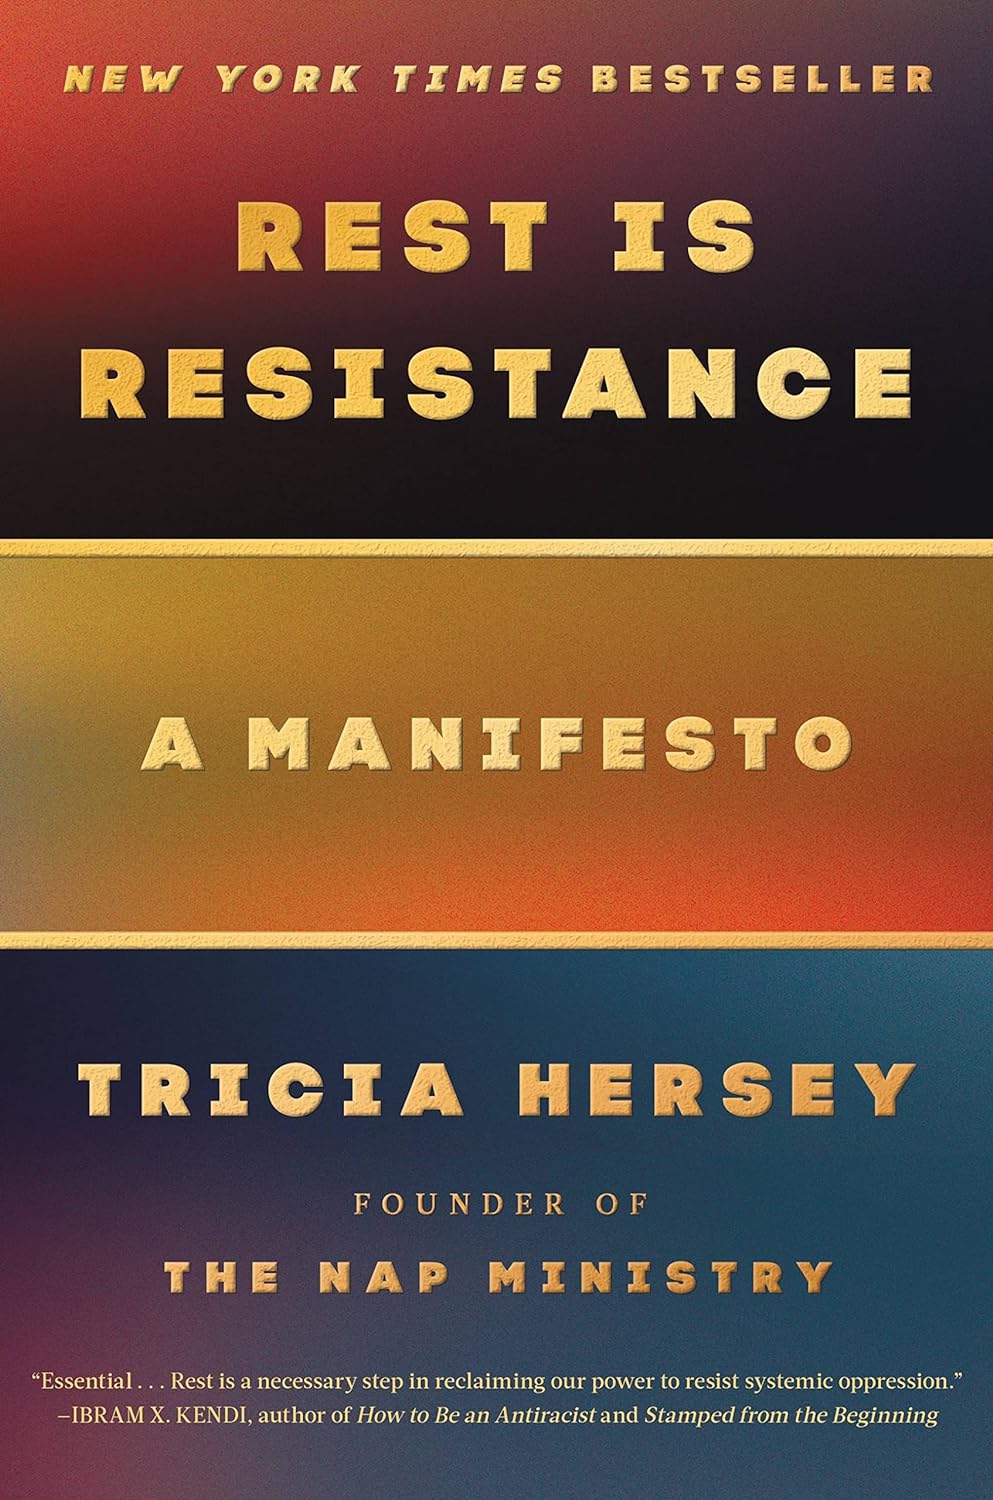 Rest Is Resistance: A Manifesto [Tricia Hersey]